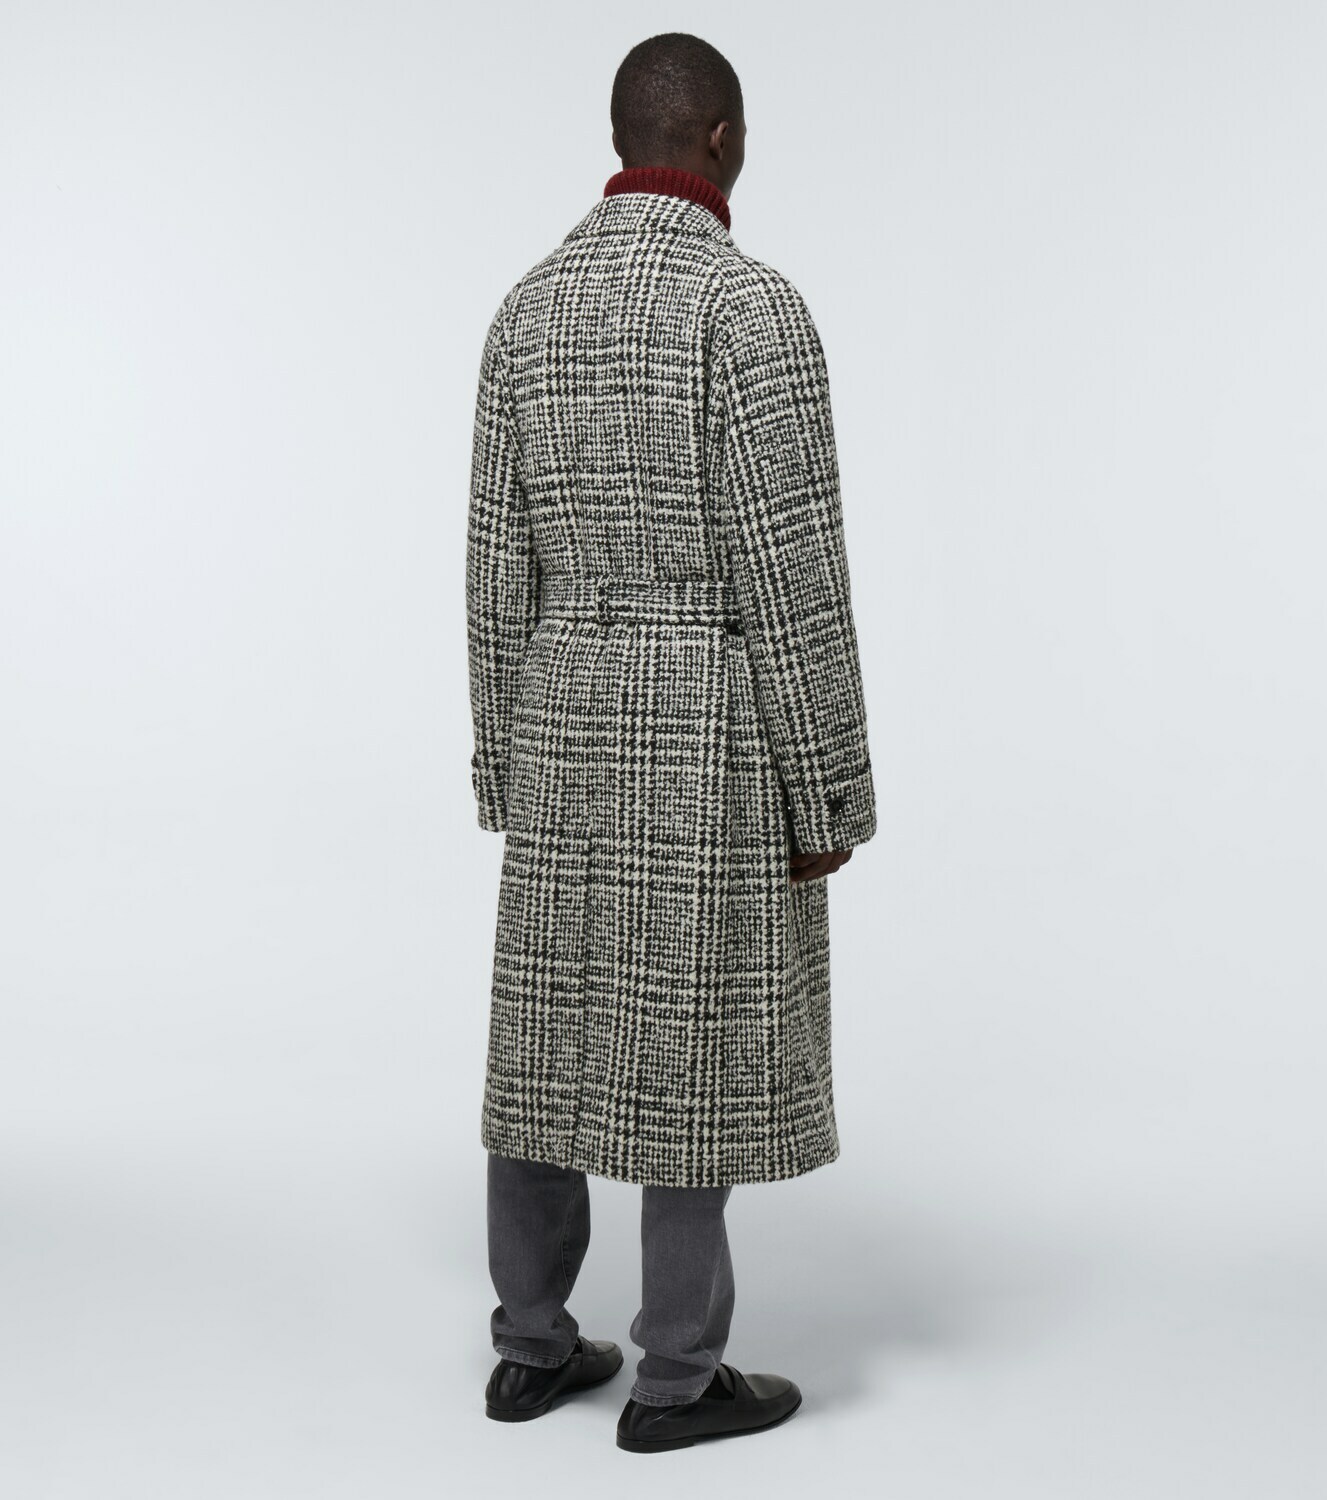 Dolce&Gabbana - Prince of Wales checked overcoat Dolce & Gabbana